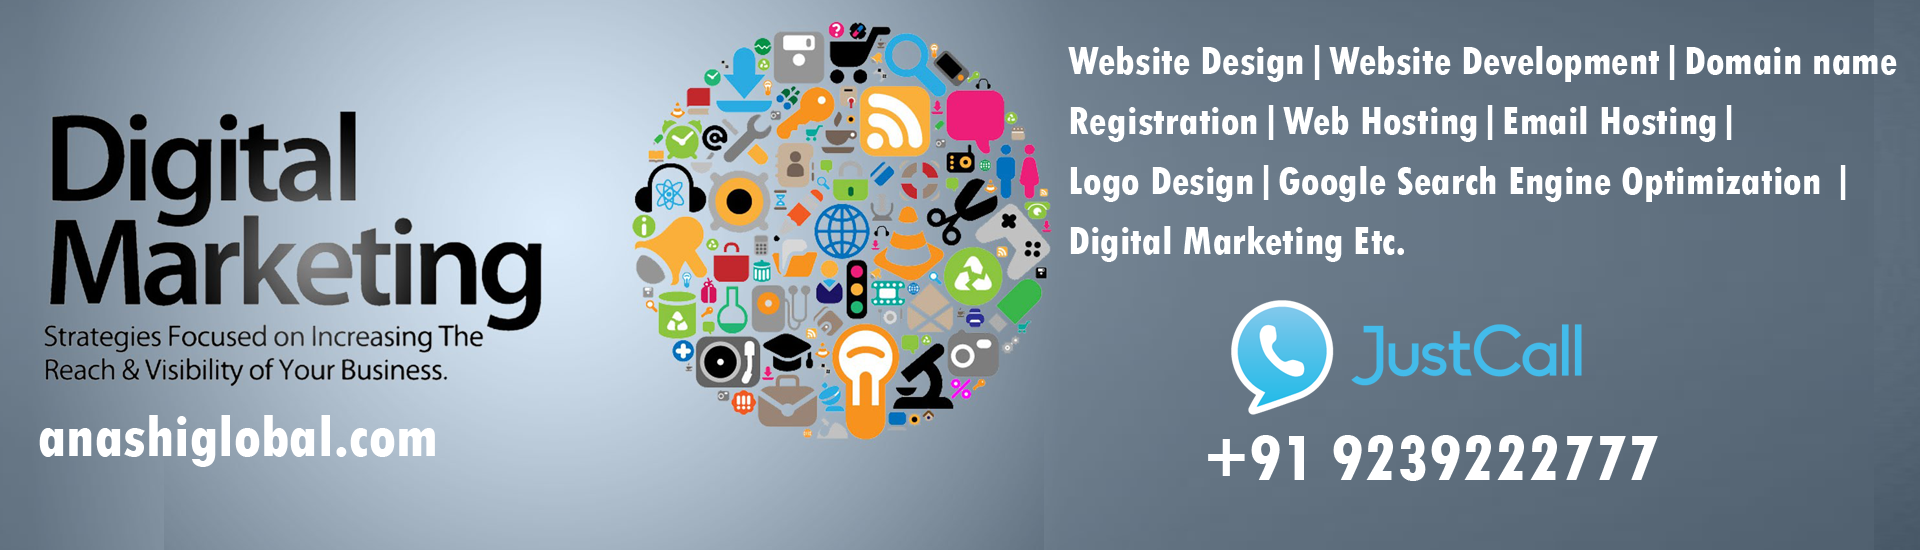 Best web development and web designing company in Dunlop